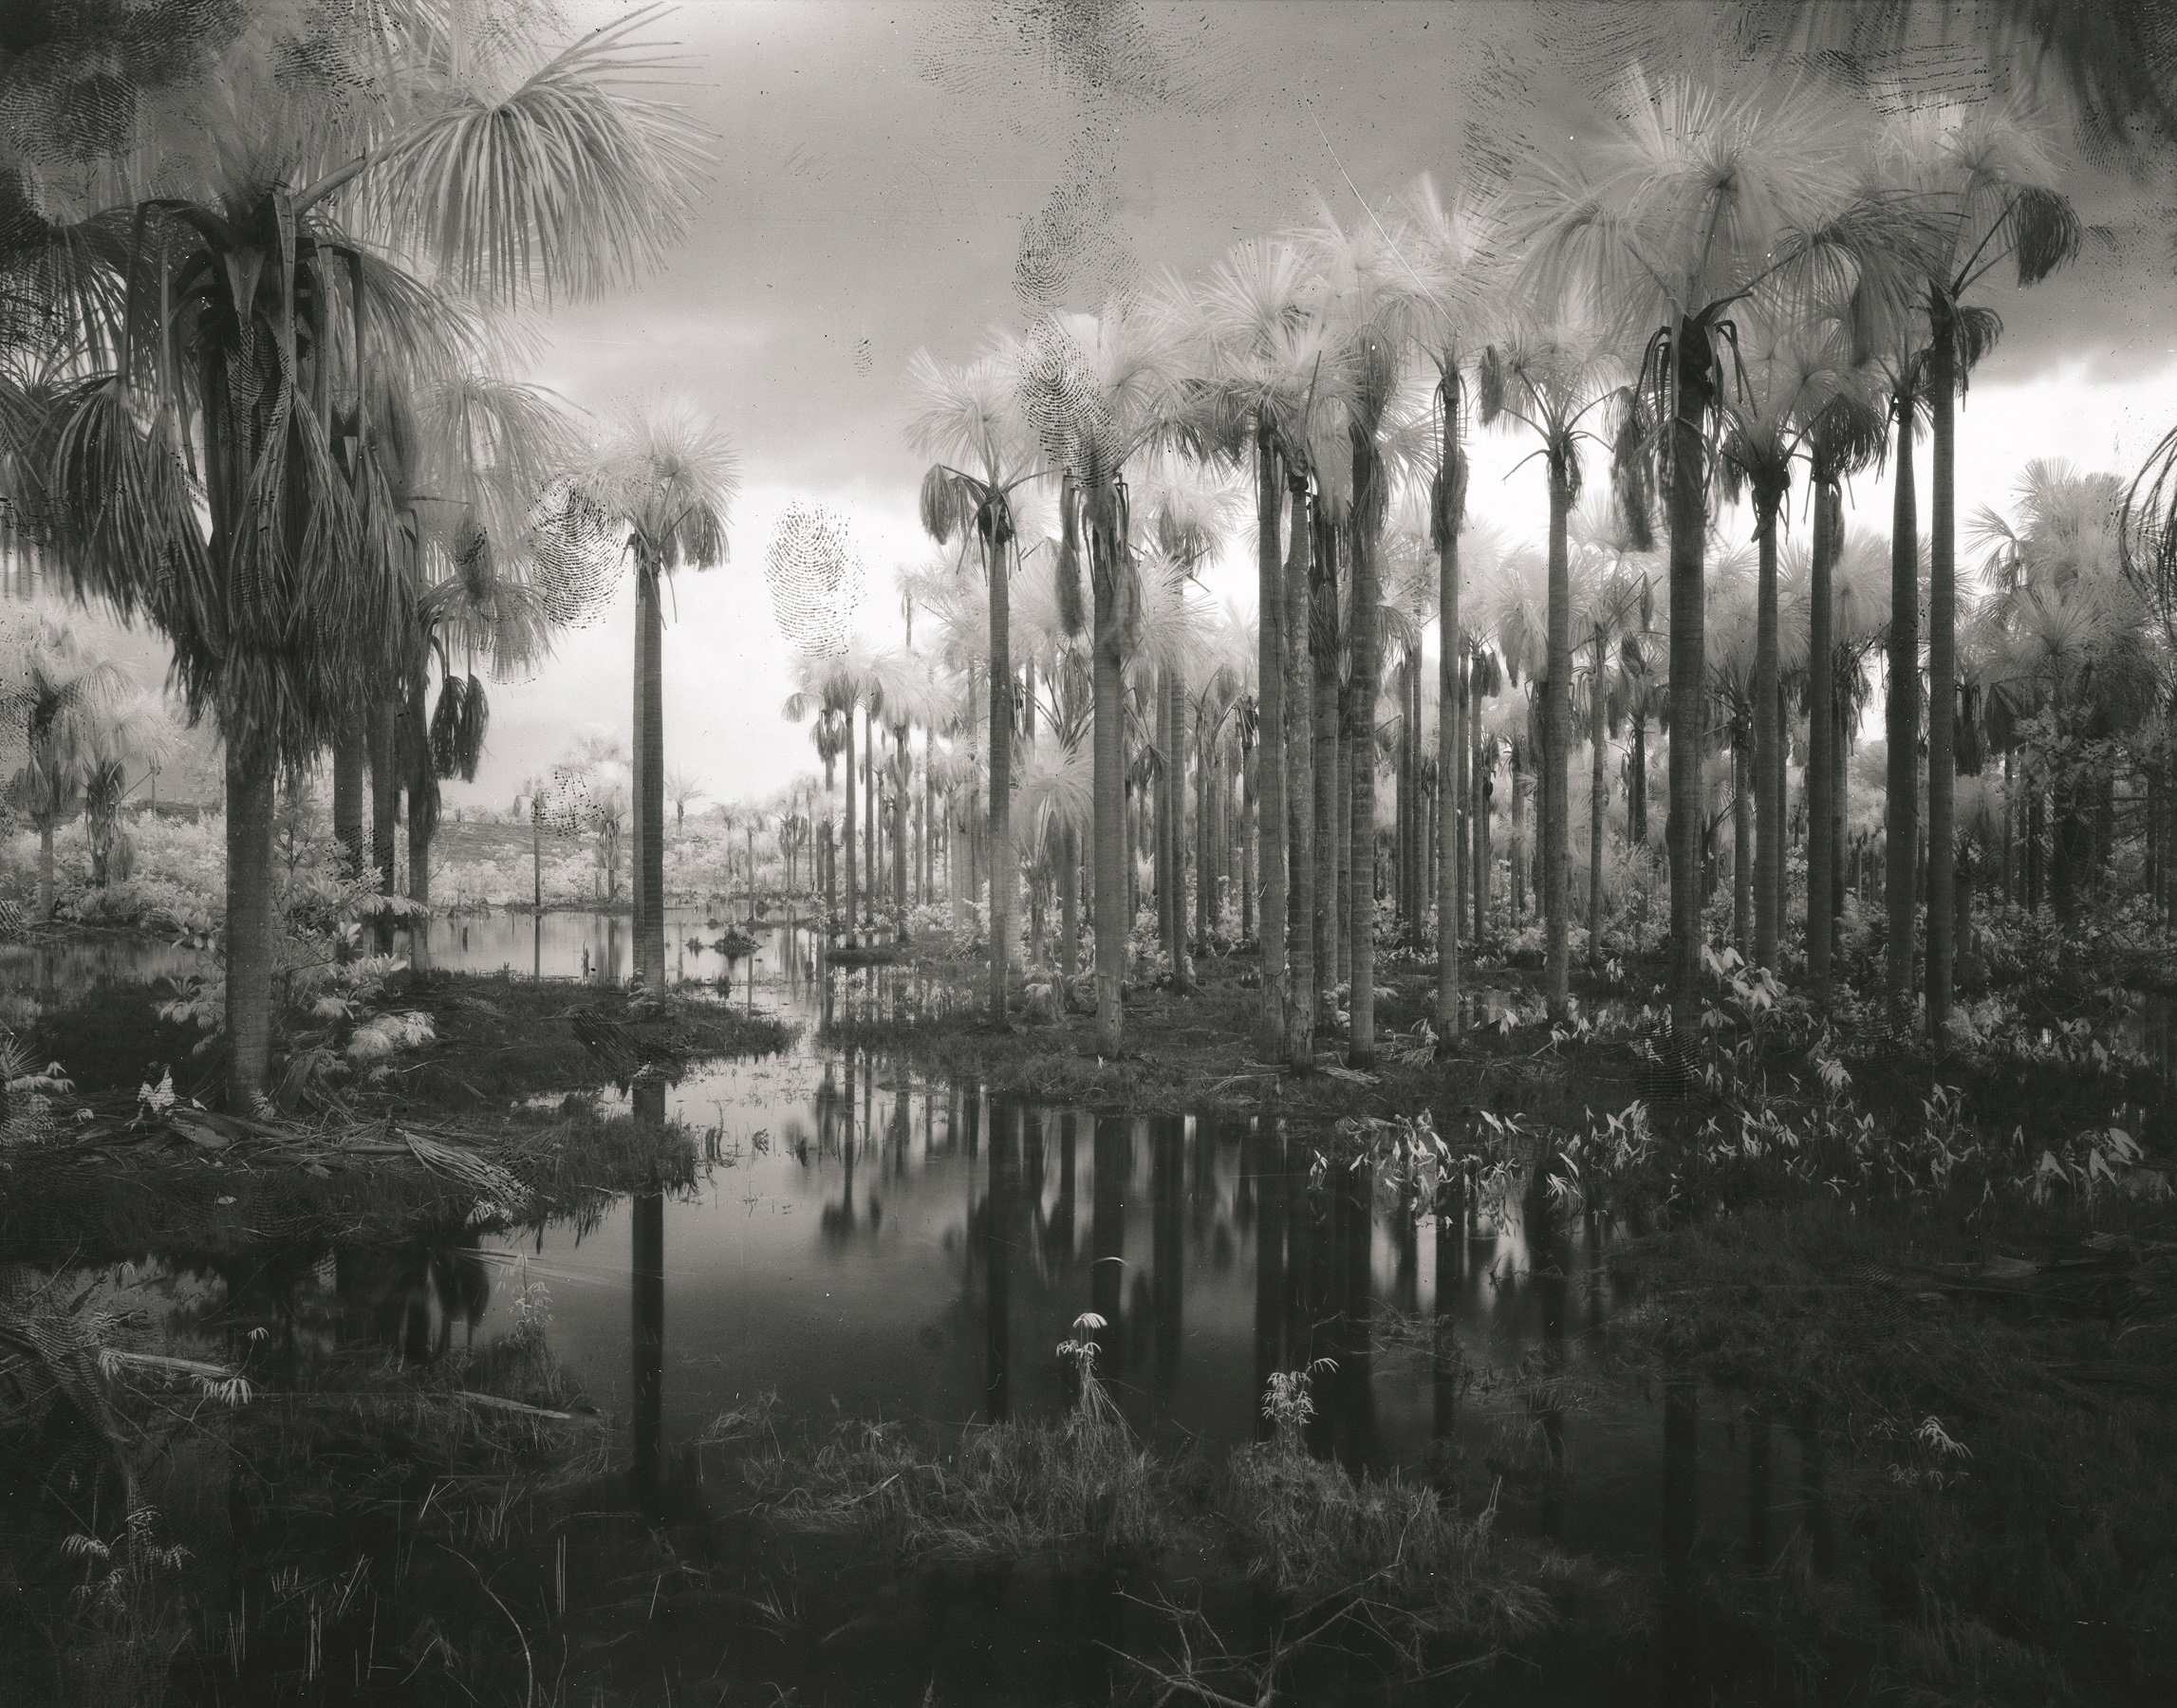 A black and white image of a still glossy-looking lake lined by tall palm trees.